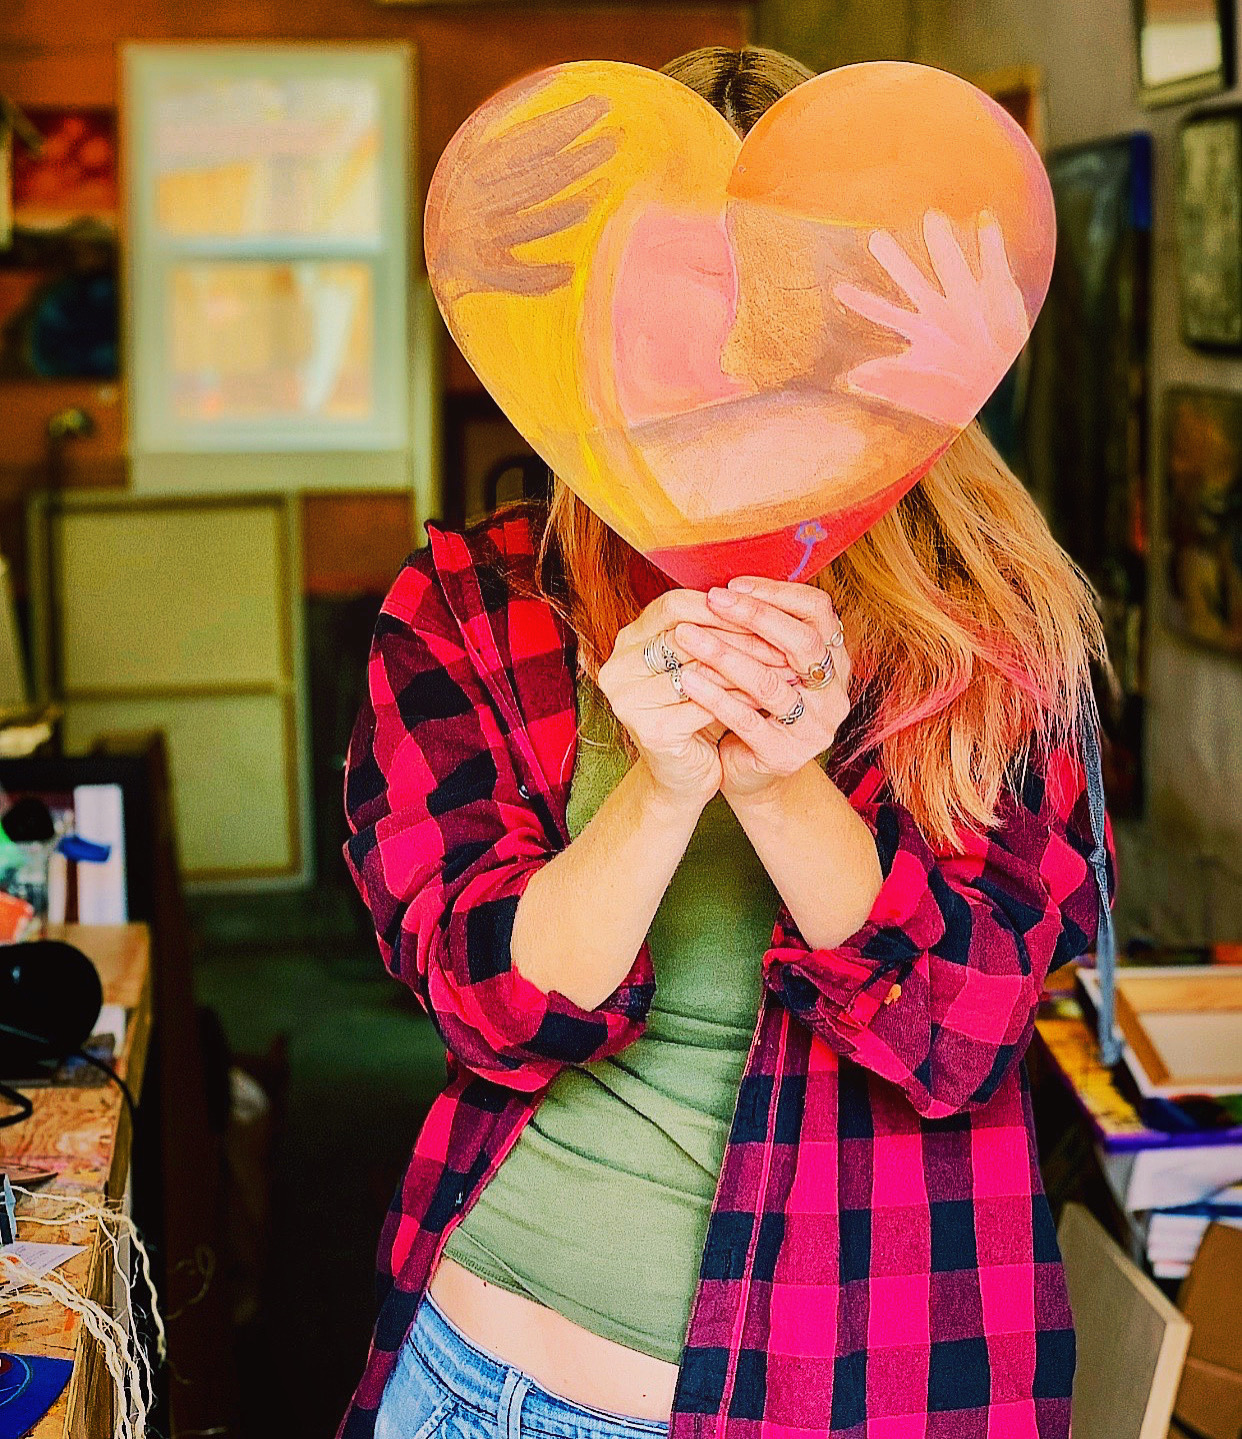 woman holding piece of artwork shaped like a heart that covers her face